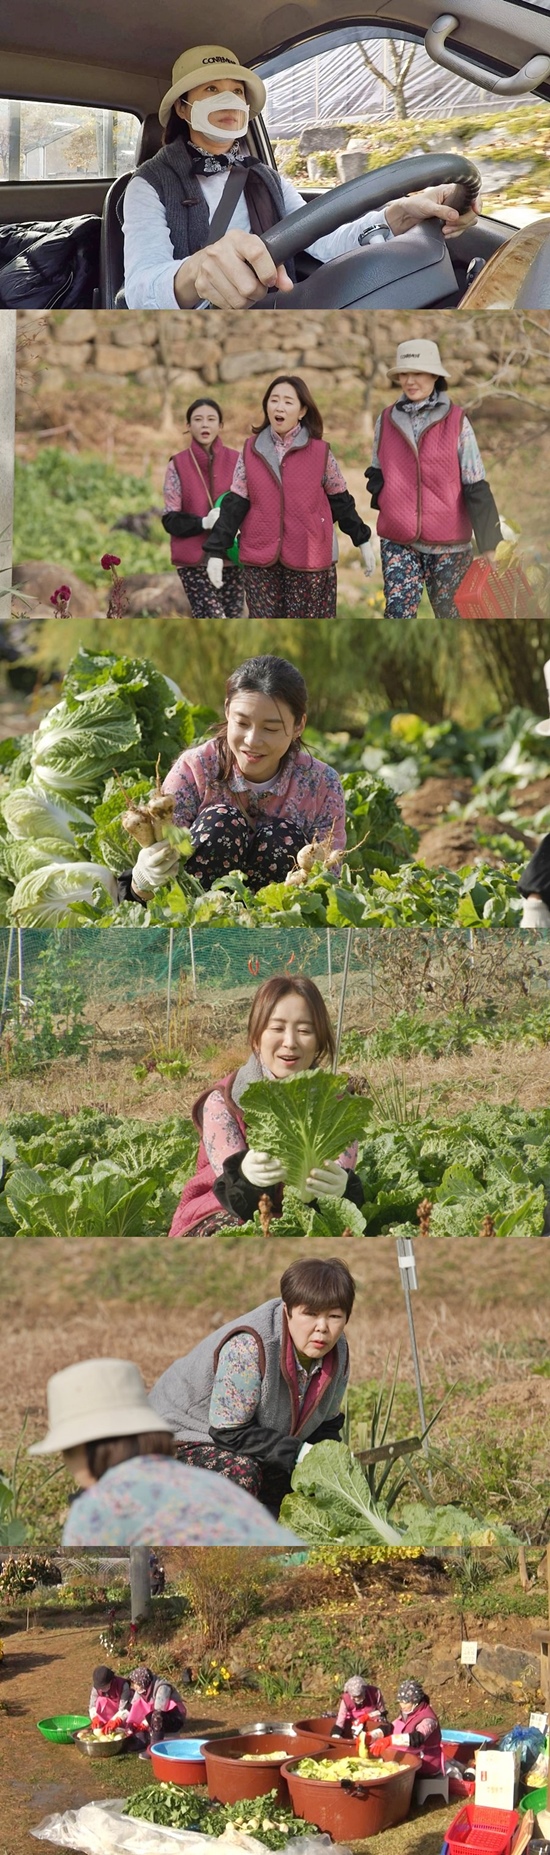 On SBS One Mans War Needs, which will be broadcast on the 23rd, the Seongsu-dong 4-member group (Oh Yeon-soo, Yun Yu-Seon, Lee Kyung-min and Cha Ye-ryun) will go to Top Model for the first kimchi of their life.On this day, Oh Yeon-soo appeared with Mitsubishi Fuso Truck and Bus Corporation with his unstoppable driving ability.The members who waited for Oh Yeon-soo expressed their admiration for the incredible sight of Mitsubishi Fuso Truck and Bus Corporation driving, and Cha Ye-ryun was surprised to say, Is it a Sister?The place they were waiting for was the garden where they planted seedlings two months ago.It is the back door that the materials and equipment necessary for the kimchi with the directly planted cabbage and radish were loaded into the Mitsubishi Fuso Truck and Bus Corporation.The Seongsu-dong group harvested Chinese cabbage and radish planted two months ago before Kim Jang, and soon after, Lee Kyung-min was in crisis and screamed.Oh Yeon-soo sighed and said, Look at that Sister, really.Lee Kyung-mins actions, which made Oh Yeon-soo laugh, raise questions about what will happen.The next day, the Seongsu-dong four-person group started full-scale kimchi and the kimchi ingredients including 100 cabbages filled with sperm front yard predicted the future kimchi hell.First, I acted in two teams: a team that washes pickled cabbage and a team that was used in abrad.However, as the work speed slowed down due to the enormous amount that does not decrease even if it continues, Yun Yu-Seon said, I play while I work. The studio MCs who watched it said, Is it Kim Jang or wavelength?I am curious about what kind of ending those who are in a situation of immediate action will face.In addition, Actor, who is known as a best friend and Kim Jang specialist for all four people who are Kim Jang novice, appeared as a support group.She was welcomed with a strong welcome, and as soon as she came, she quickly grasped the situation and felt her fate and laughed around her.However, I will change into a work clothes soon, and I can not finish it before it gets dark at this speed, he said.The first Top Model of the Seongsu-dong four-member twists and turns can be found on One Mans War, which is broadcasted at 9 pm on Thursday, 23rd.Photo = SBS